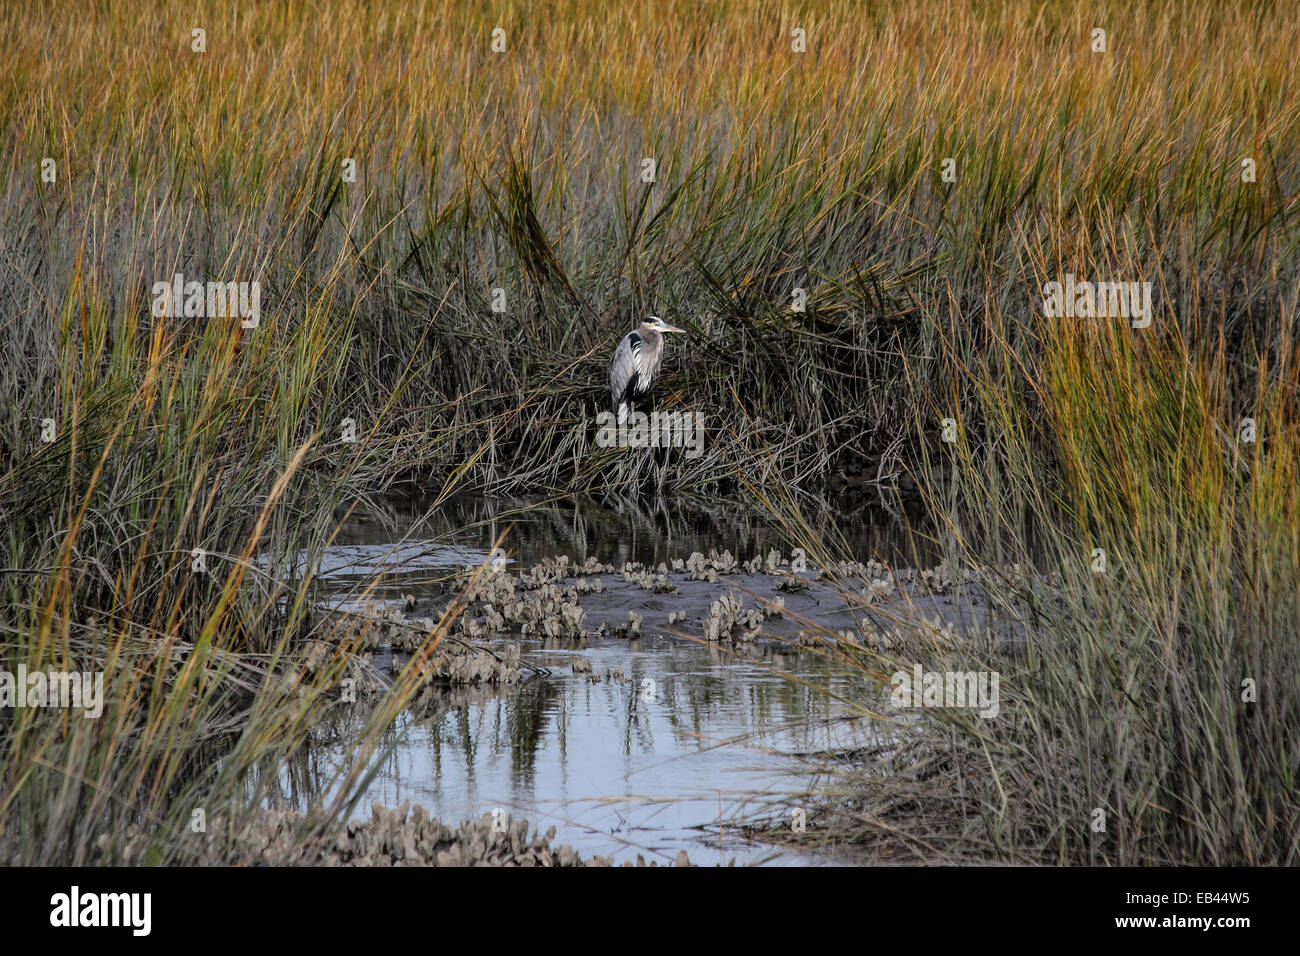 A salt marsh landscape with a Great blue heron at its center Stock Photo